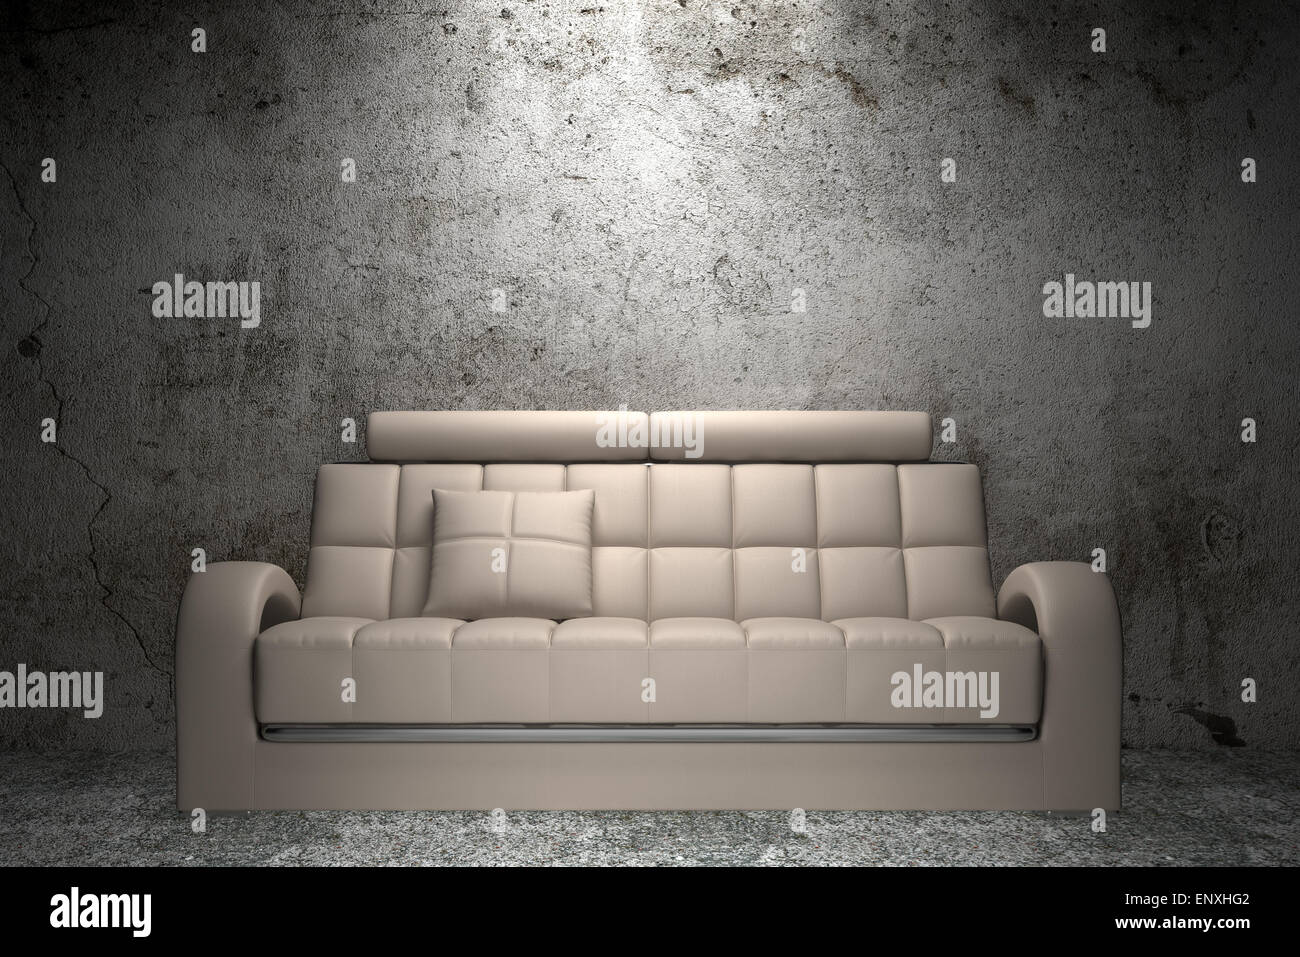 leather sofa in front of grunge concrete wall Stock Photo